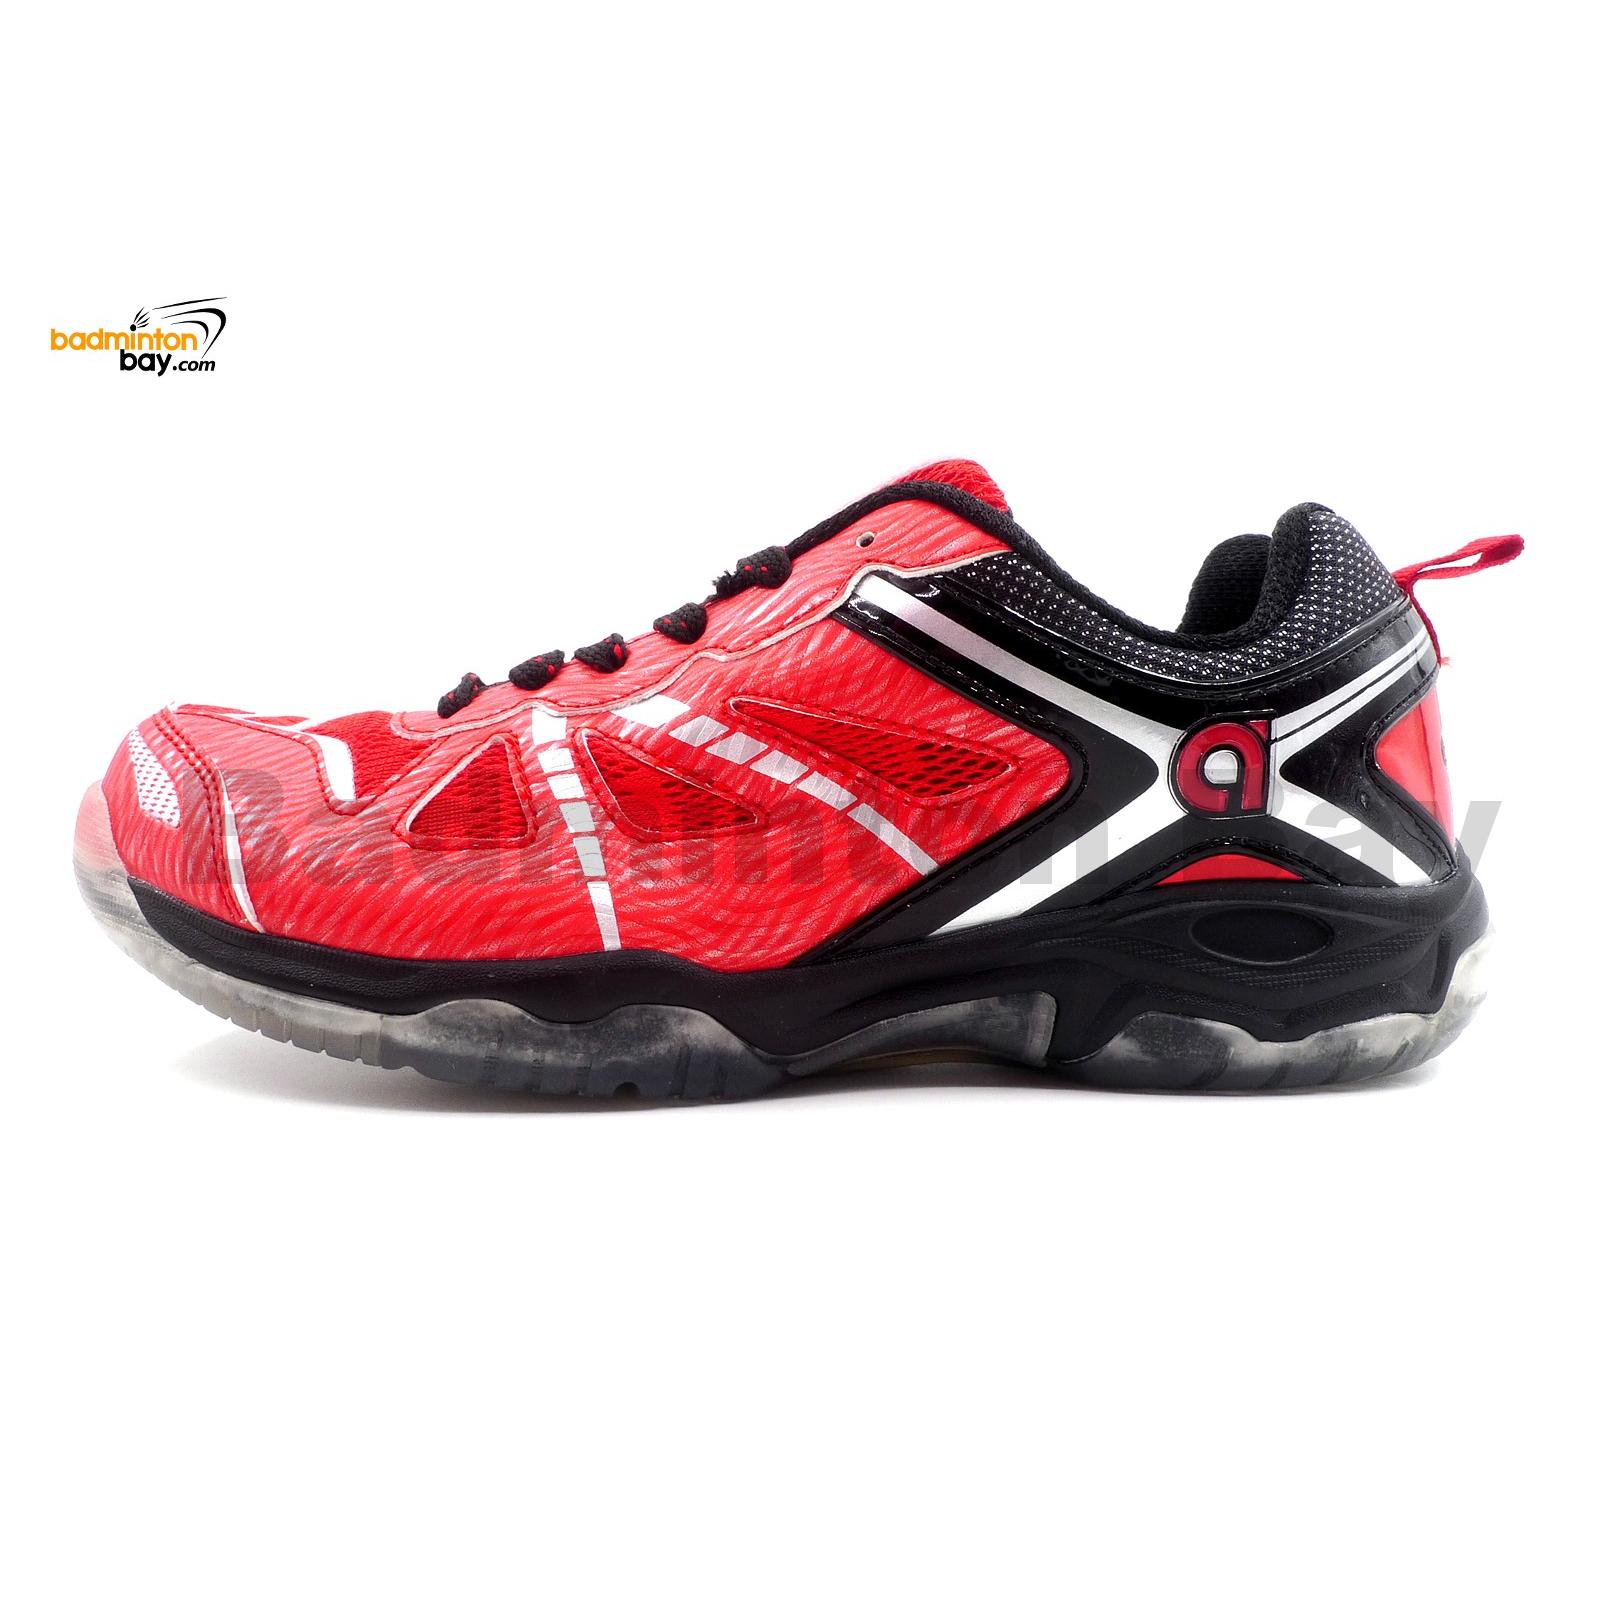 Apacs Cushion Power 070 Red Badminton Shoes With Transparent Outsole ...